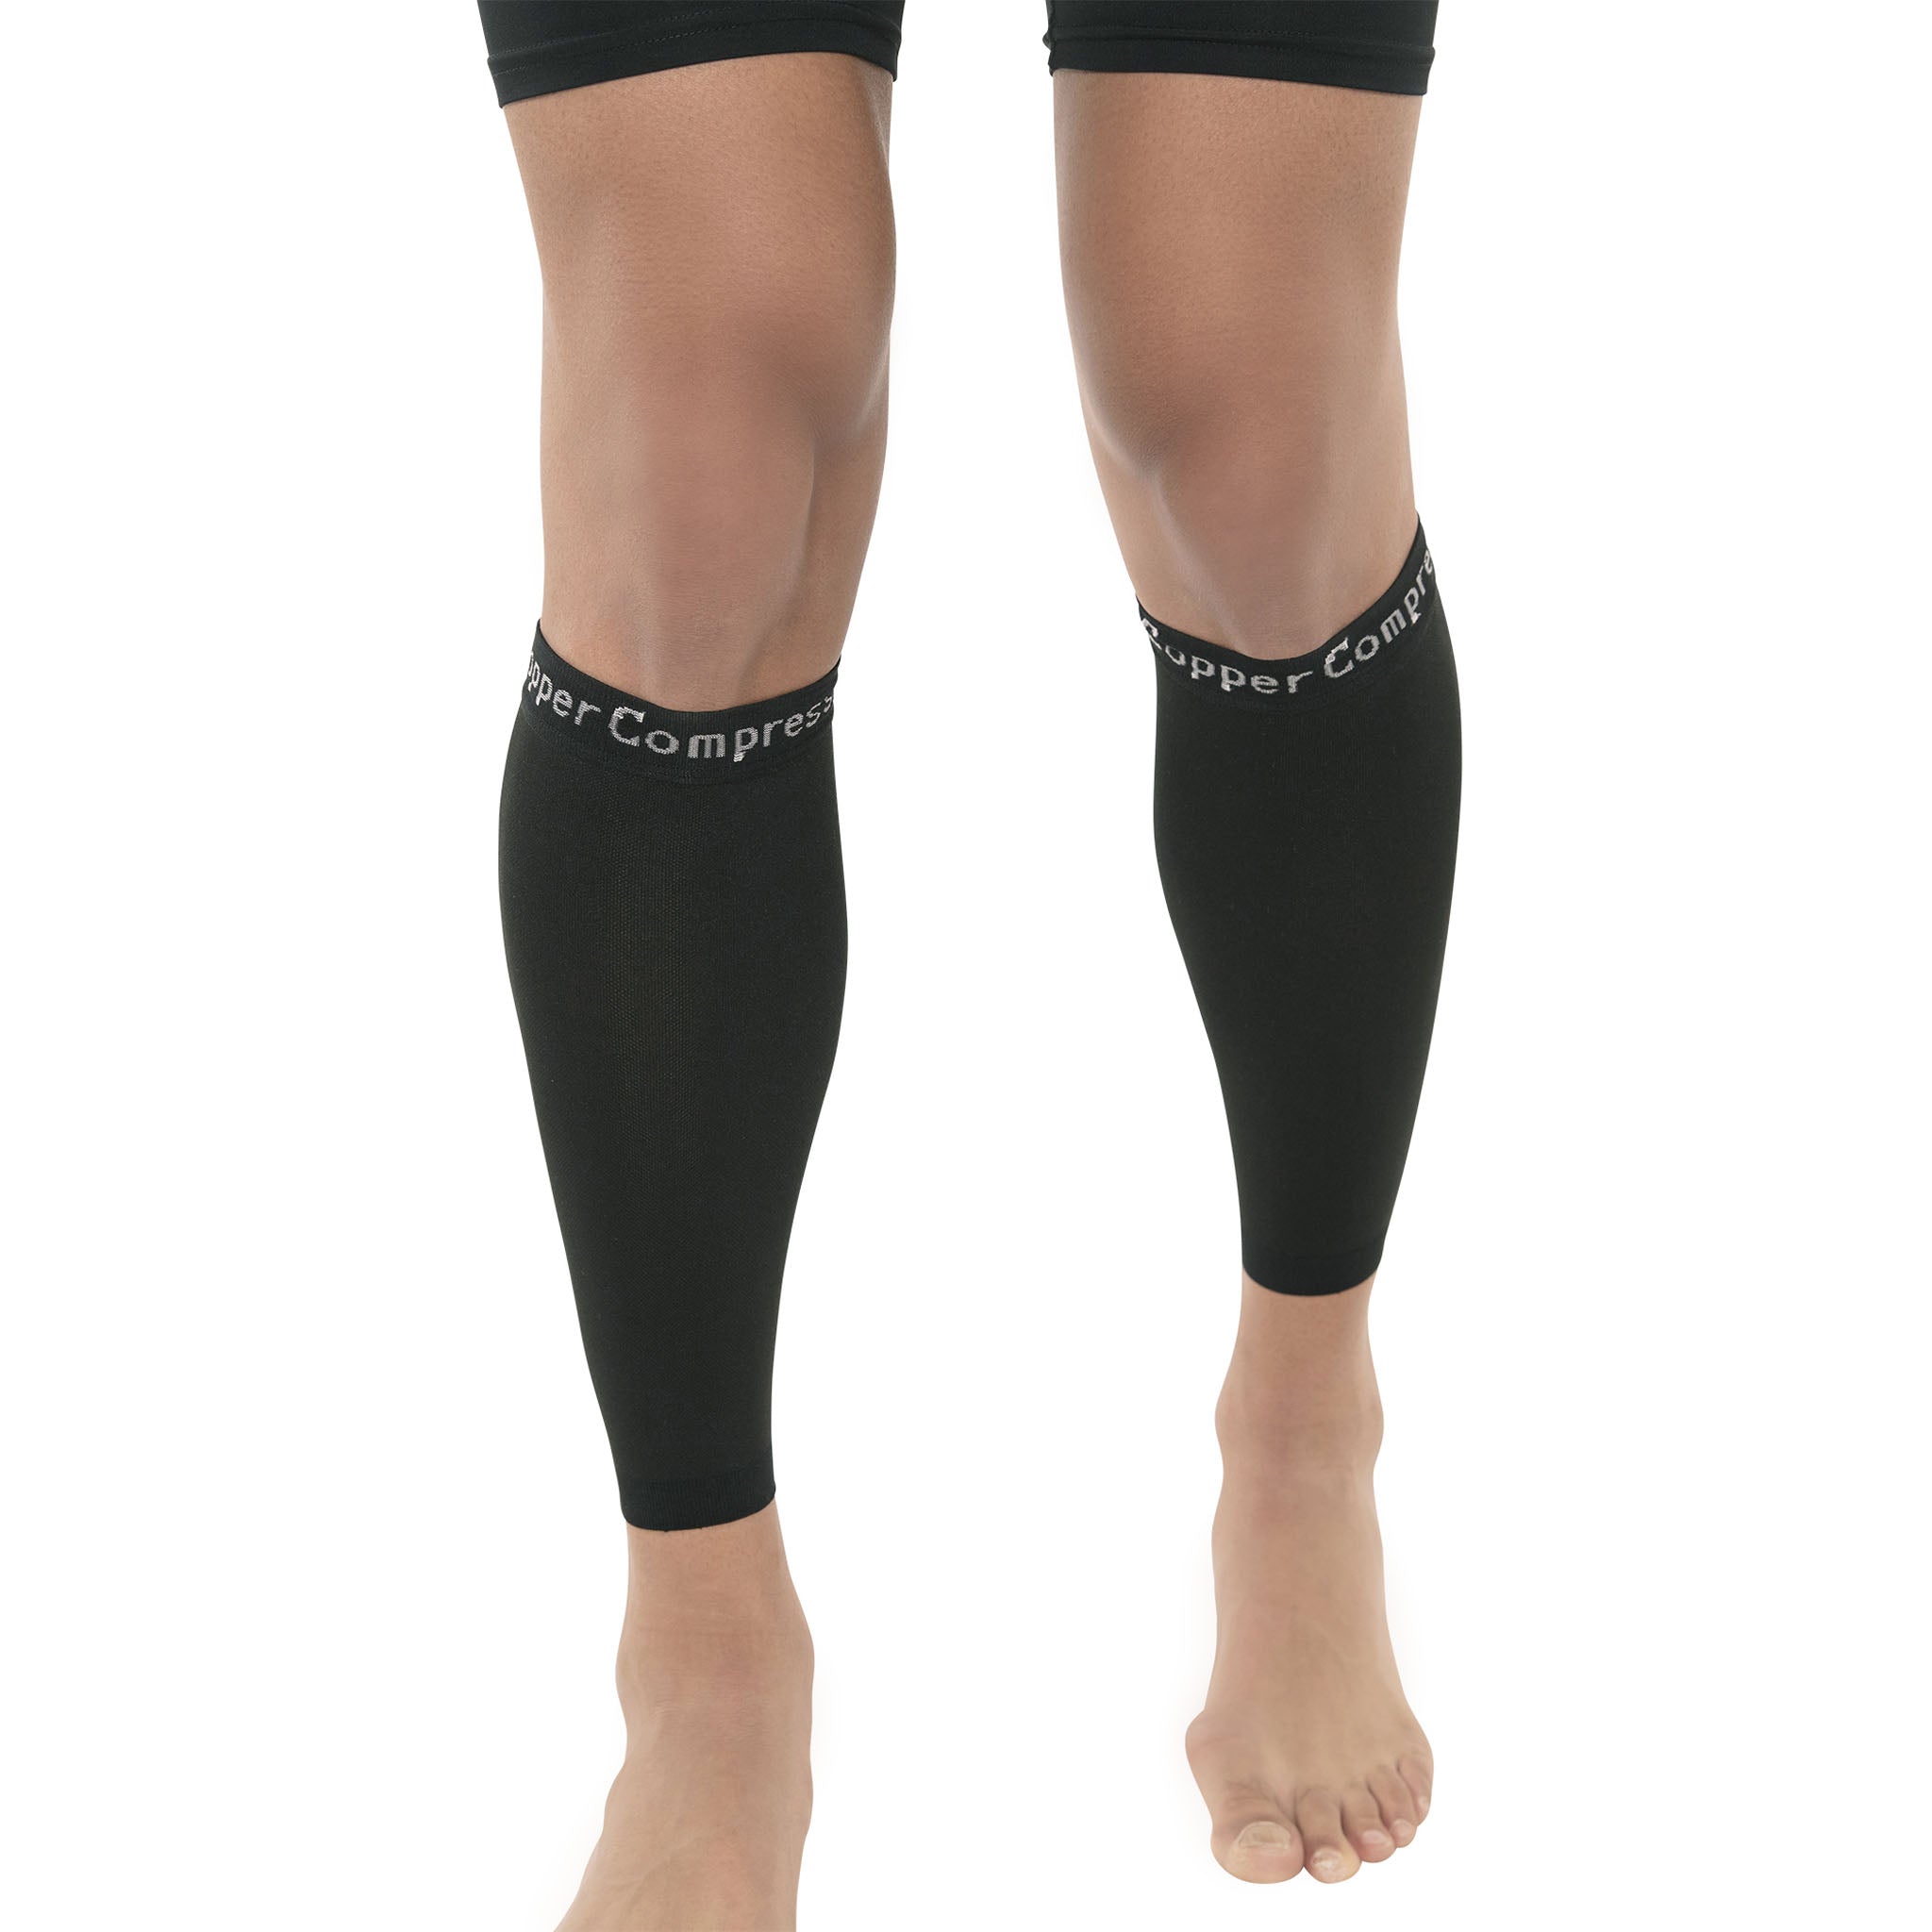 Full Leg Sleeve Compression Leg Sleeve Knee Sleeve Protects Legs Reduces Varicose  Veins And Leg Swelling (pair)